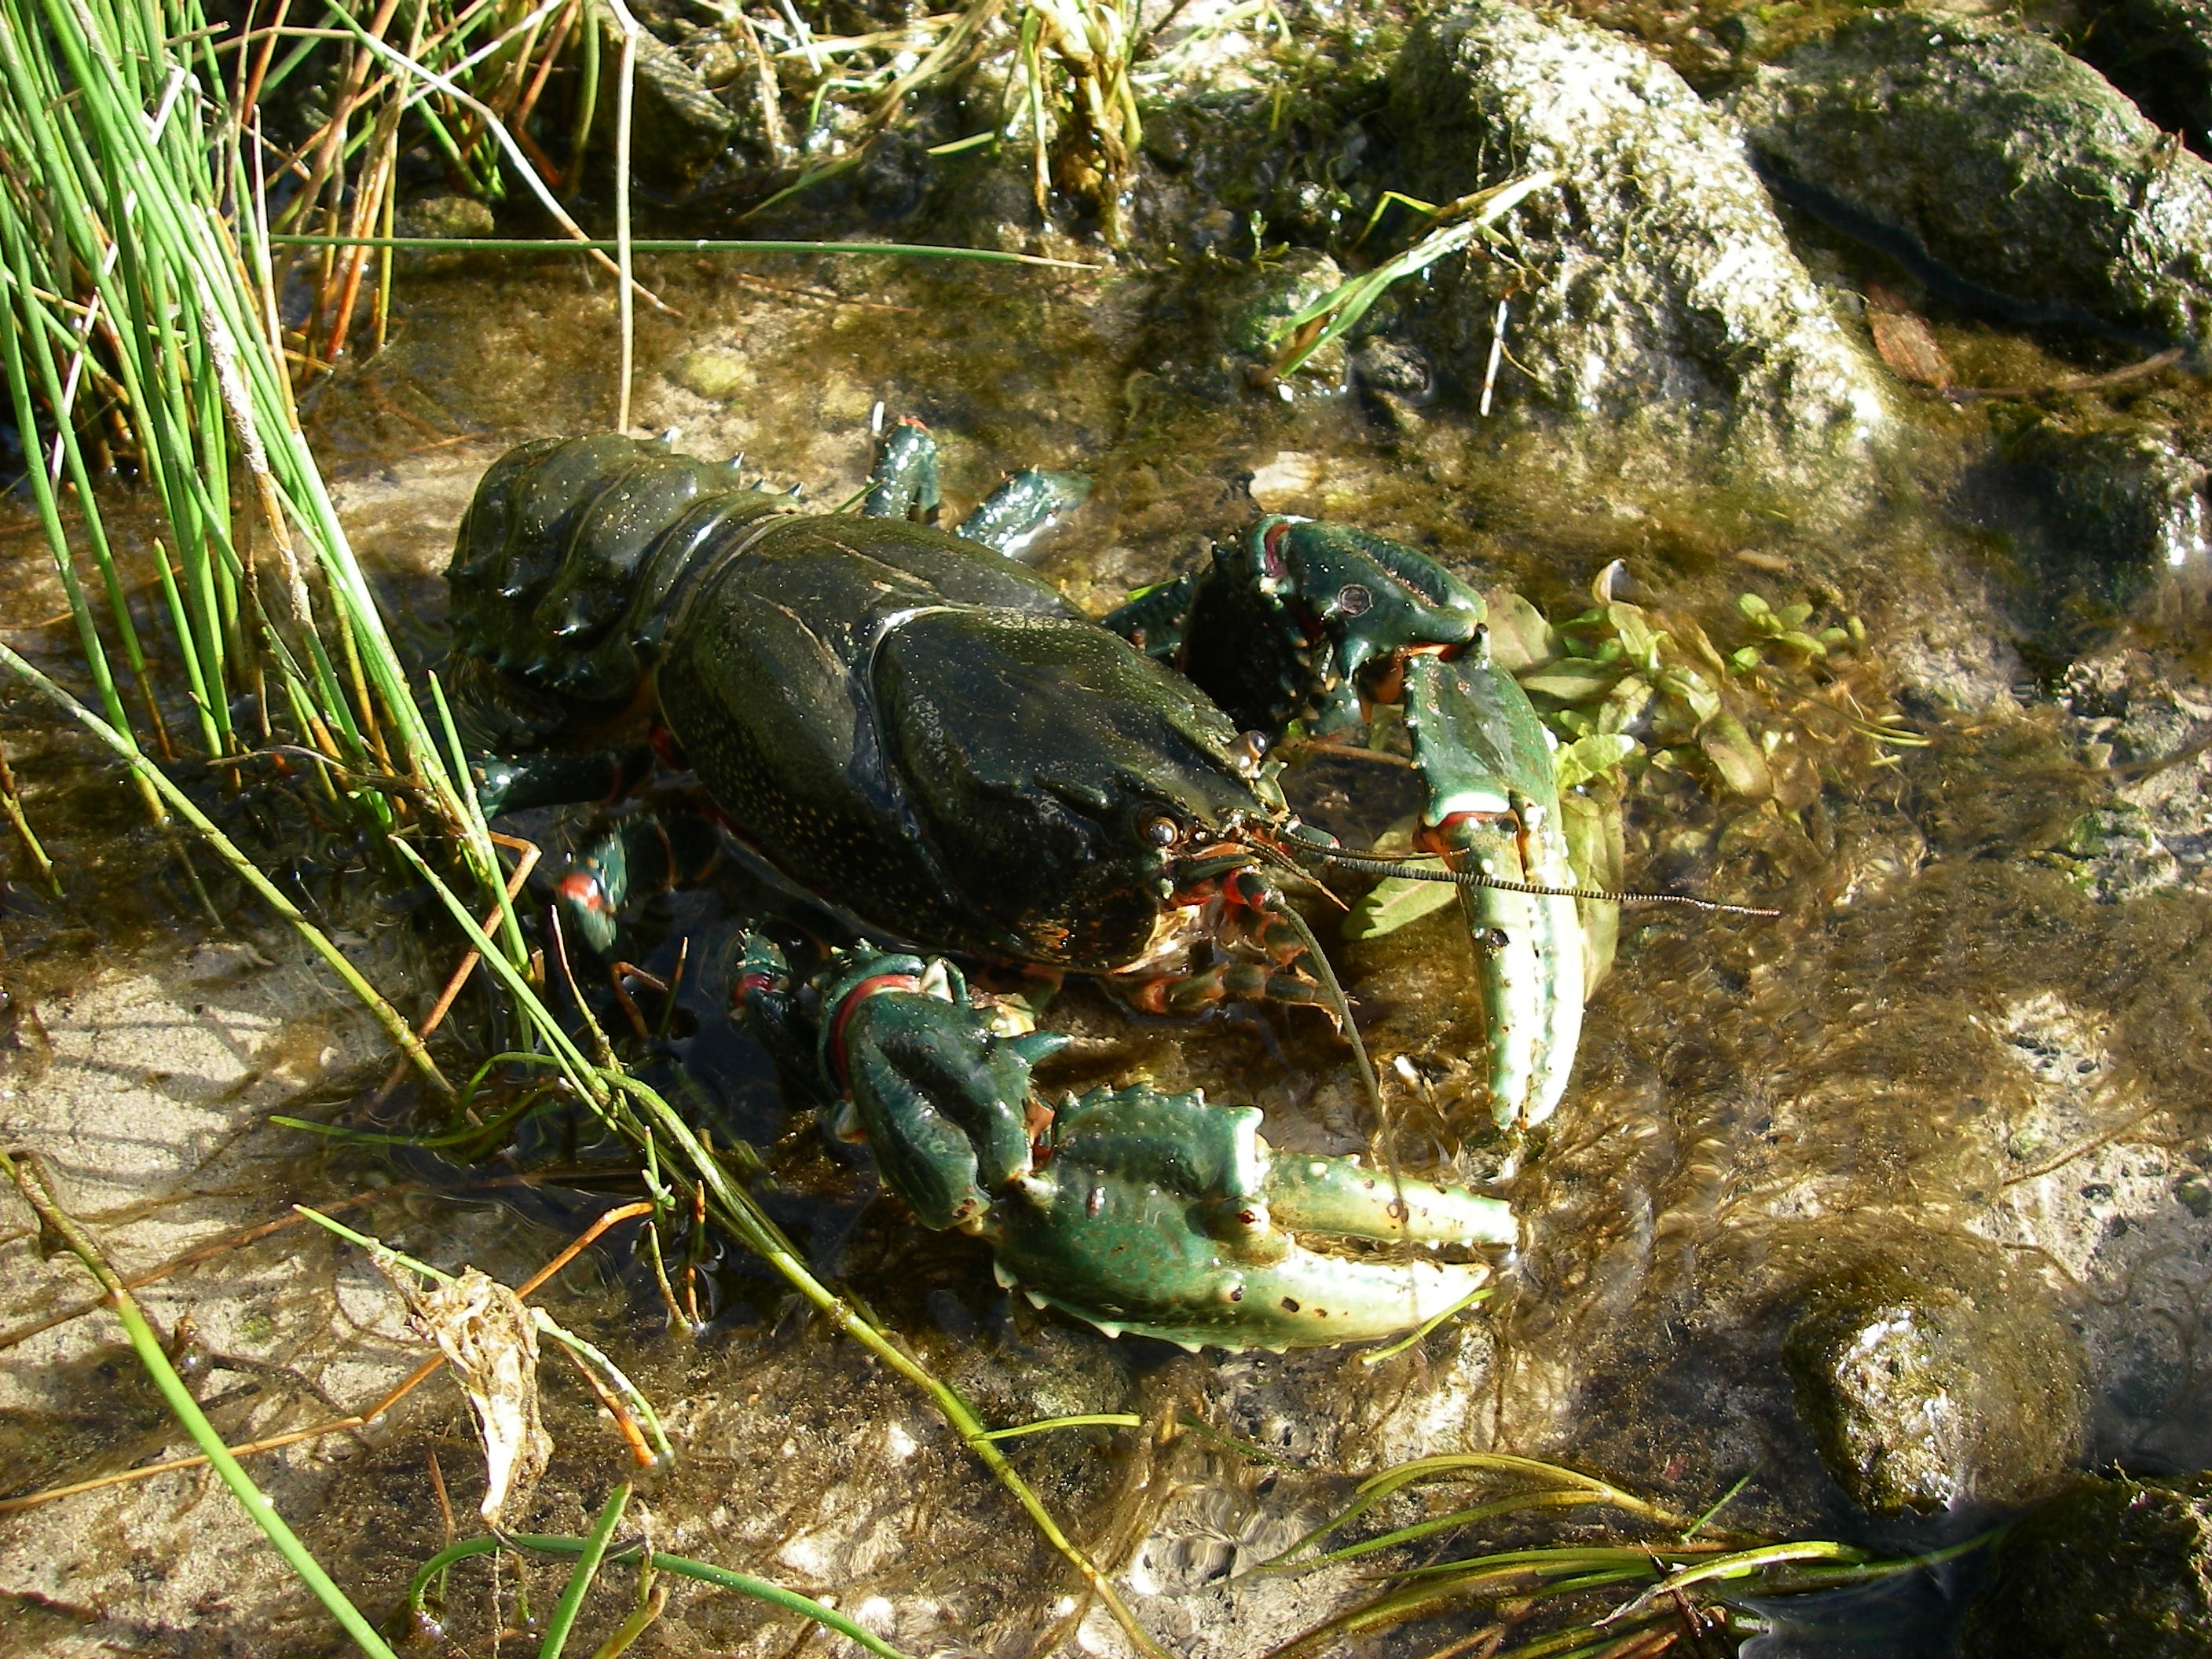 There are 22 species of spiny crayfish that need urgent intervention following the bushfires.